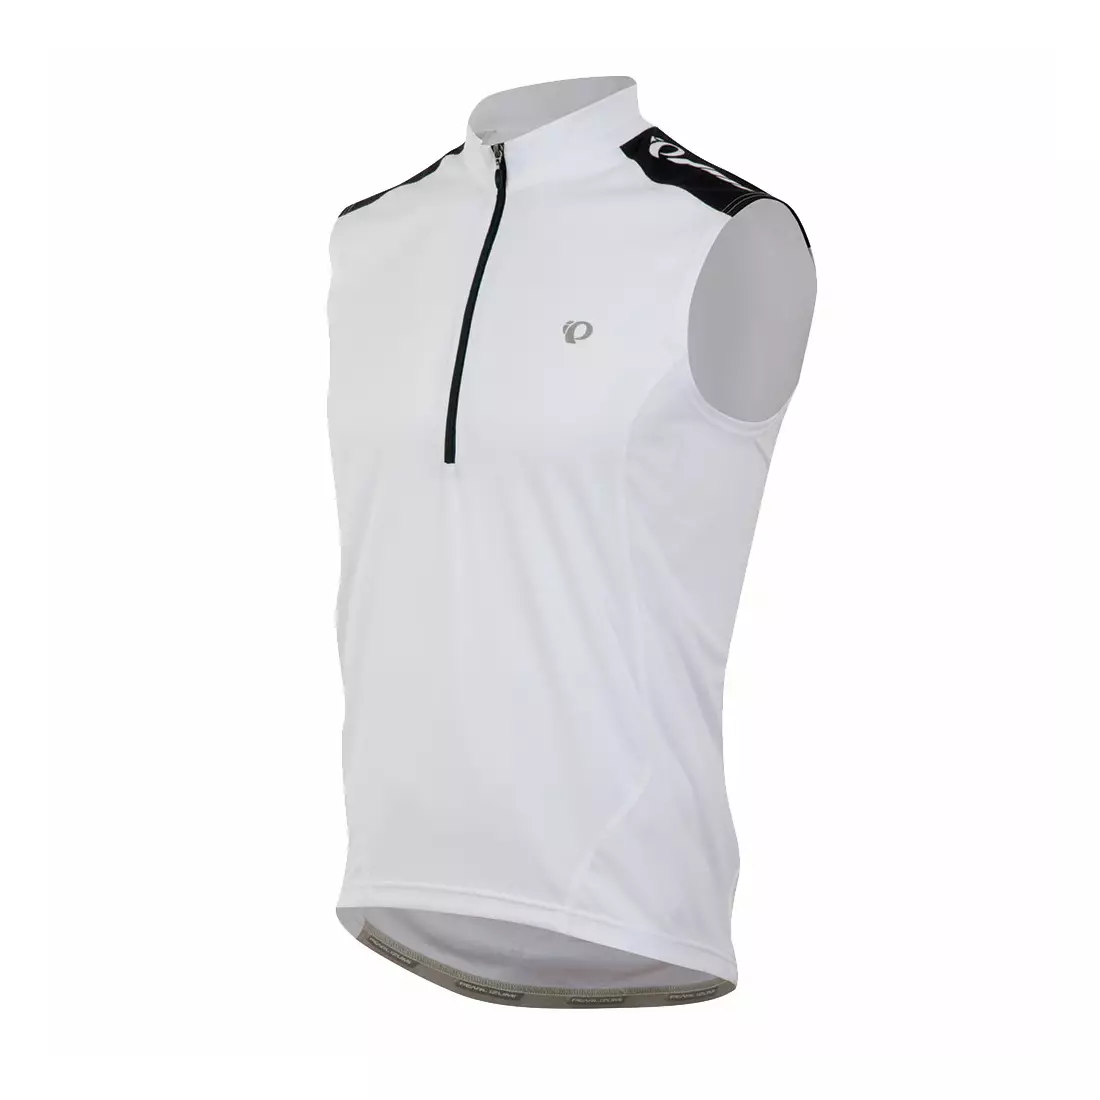 PEARL IZUMI SELECT QUEST - men's sleeveless cycling jersey 11121408-508